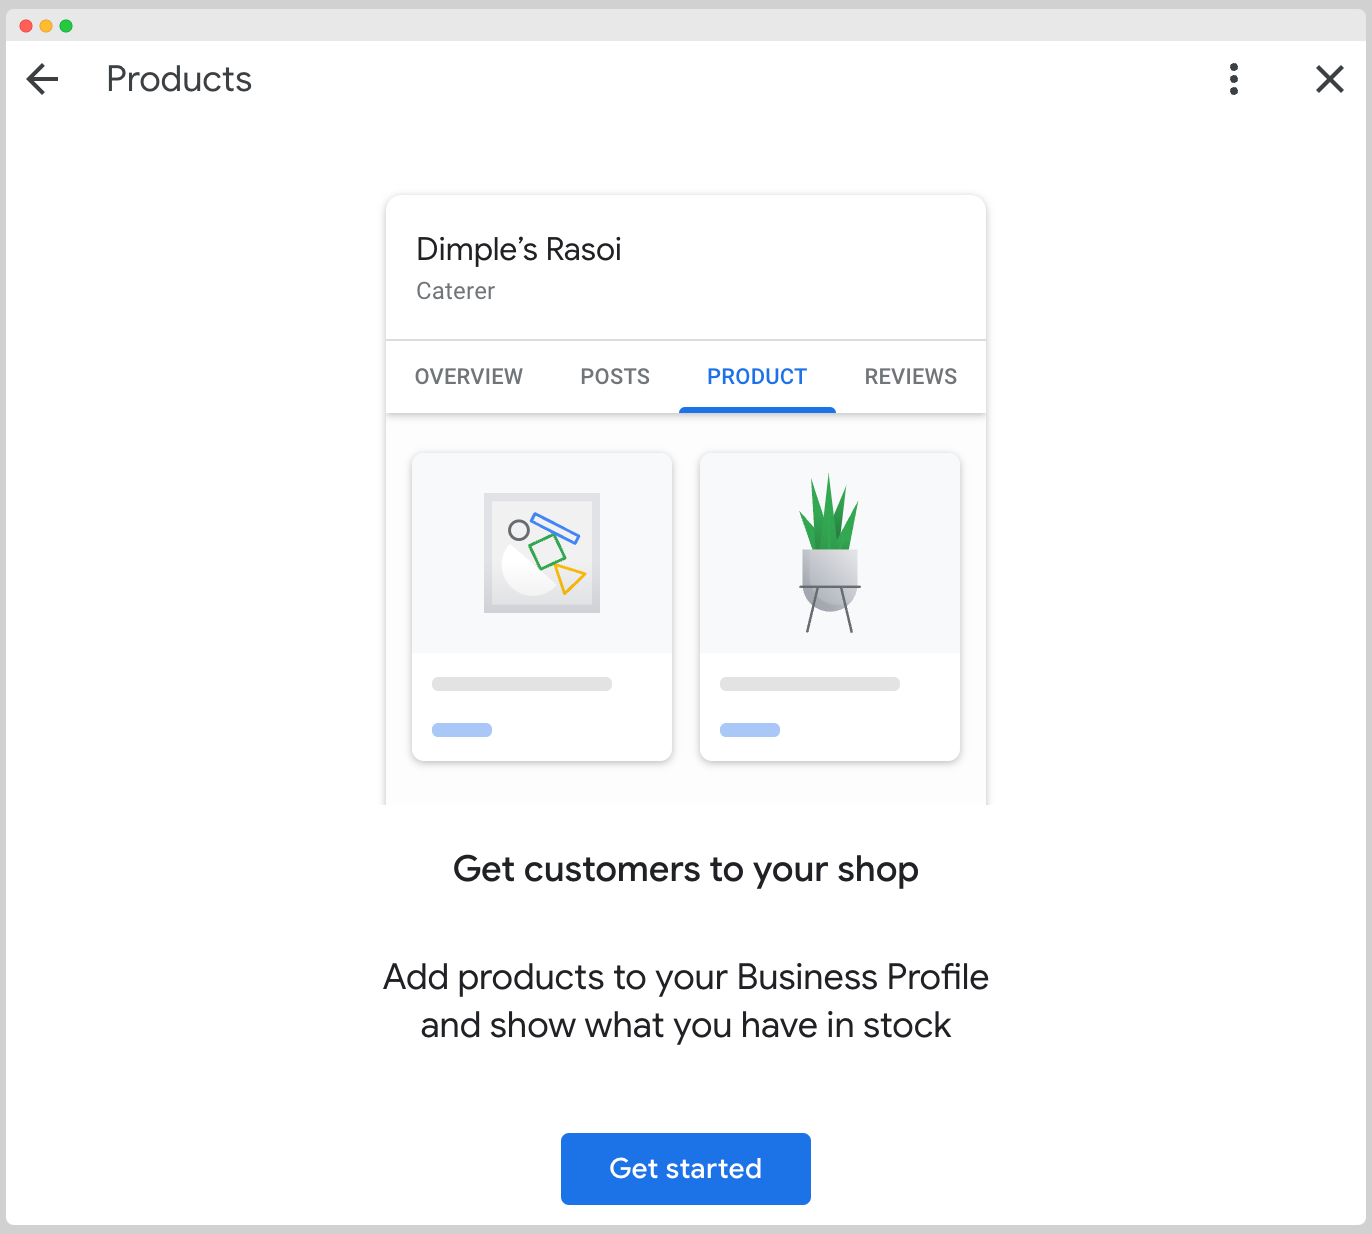 Google Business Profile - Add Products